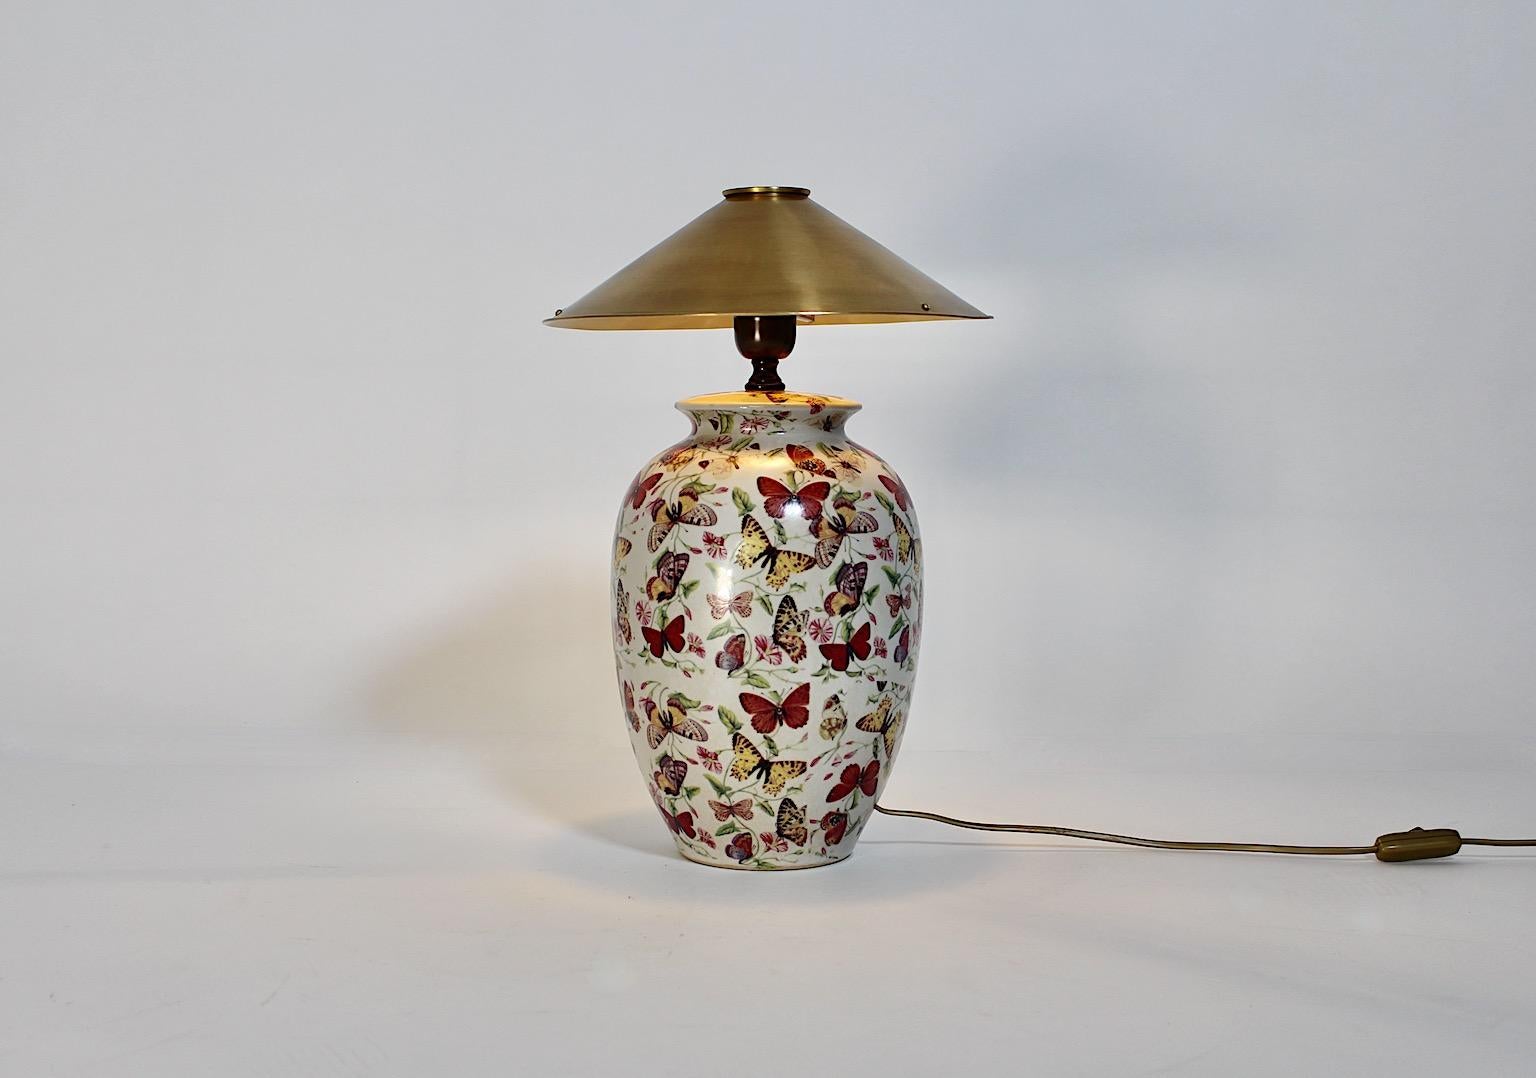 Modern vintage table lamp from ceramic and brass with multicolored printed butterfly and flowers decor 1980s.
This amazing and feminine table lamp from ceramic and brass shows a ceramic body full of printed multicolored butterflies and flowers,